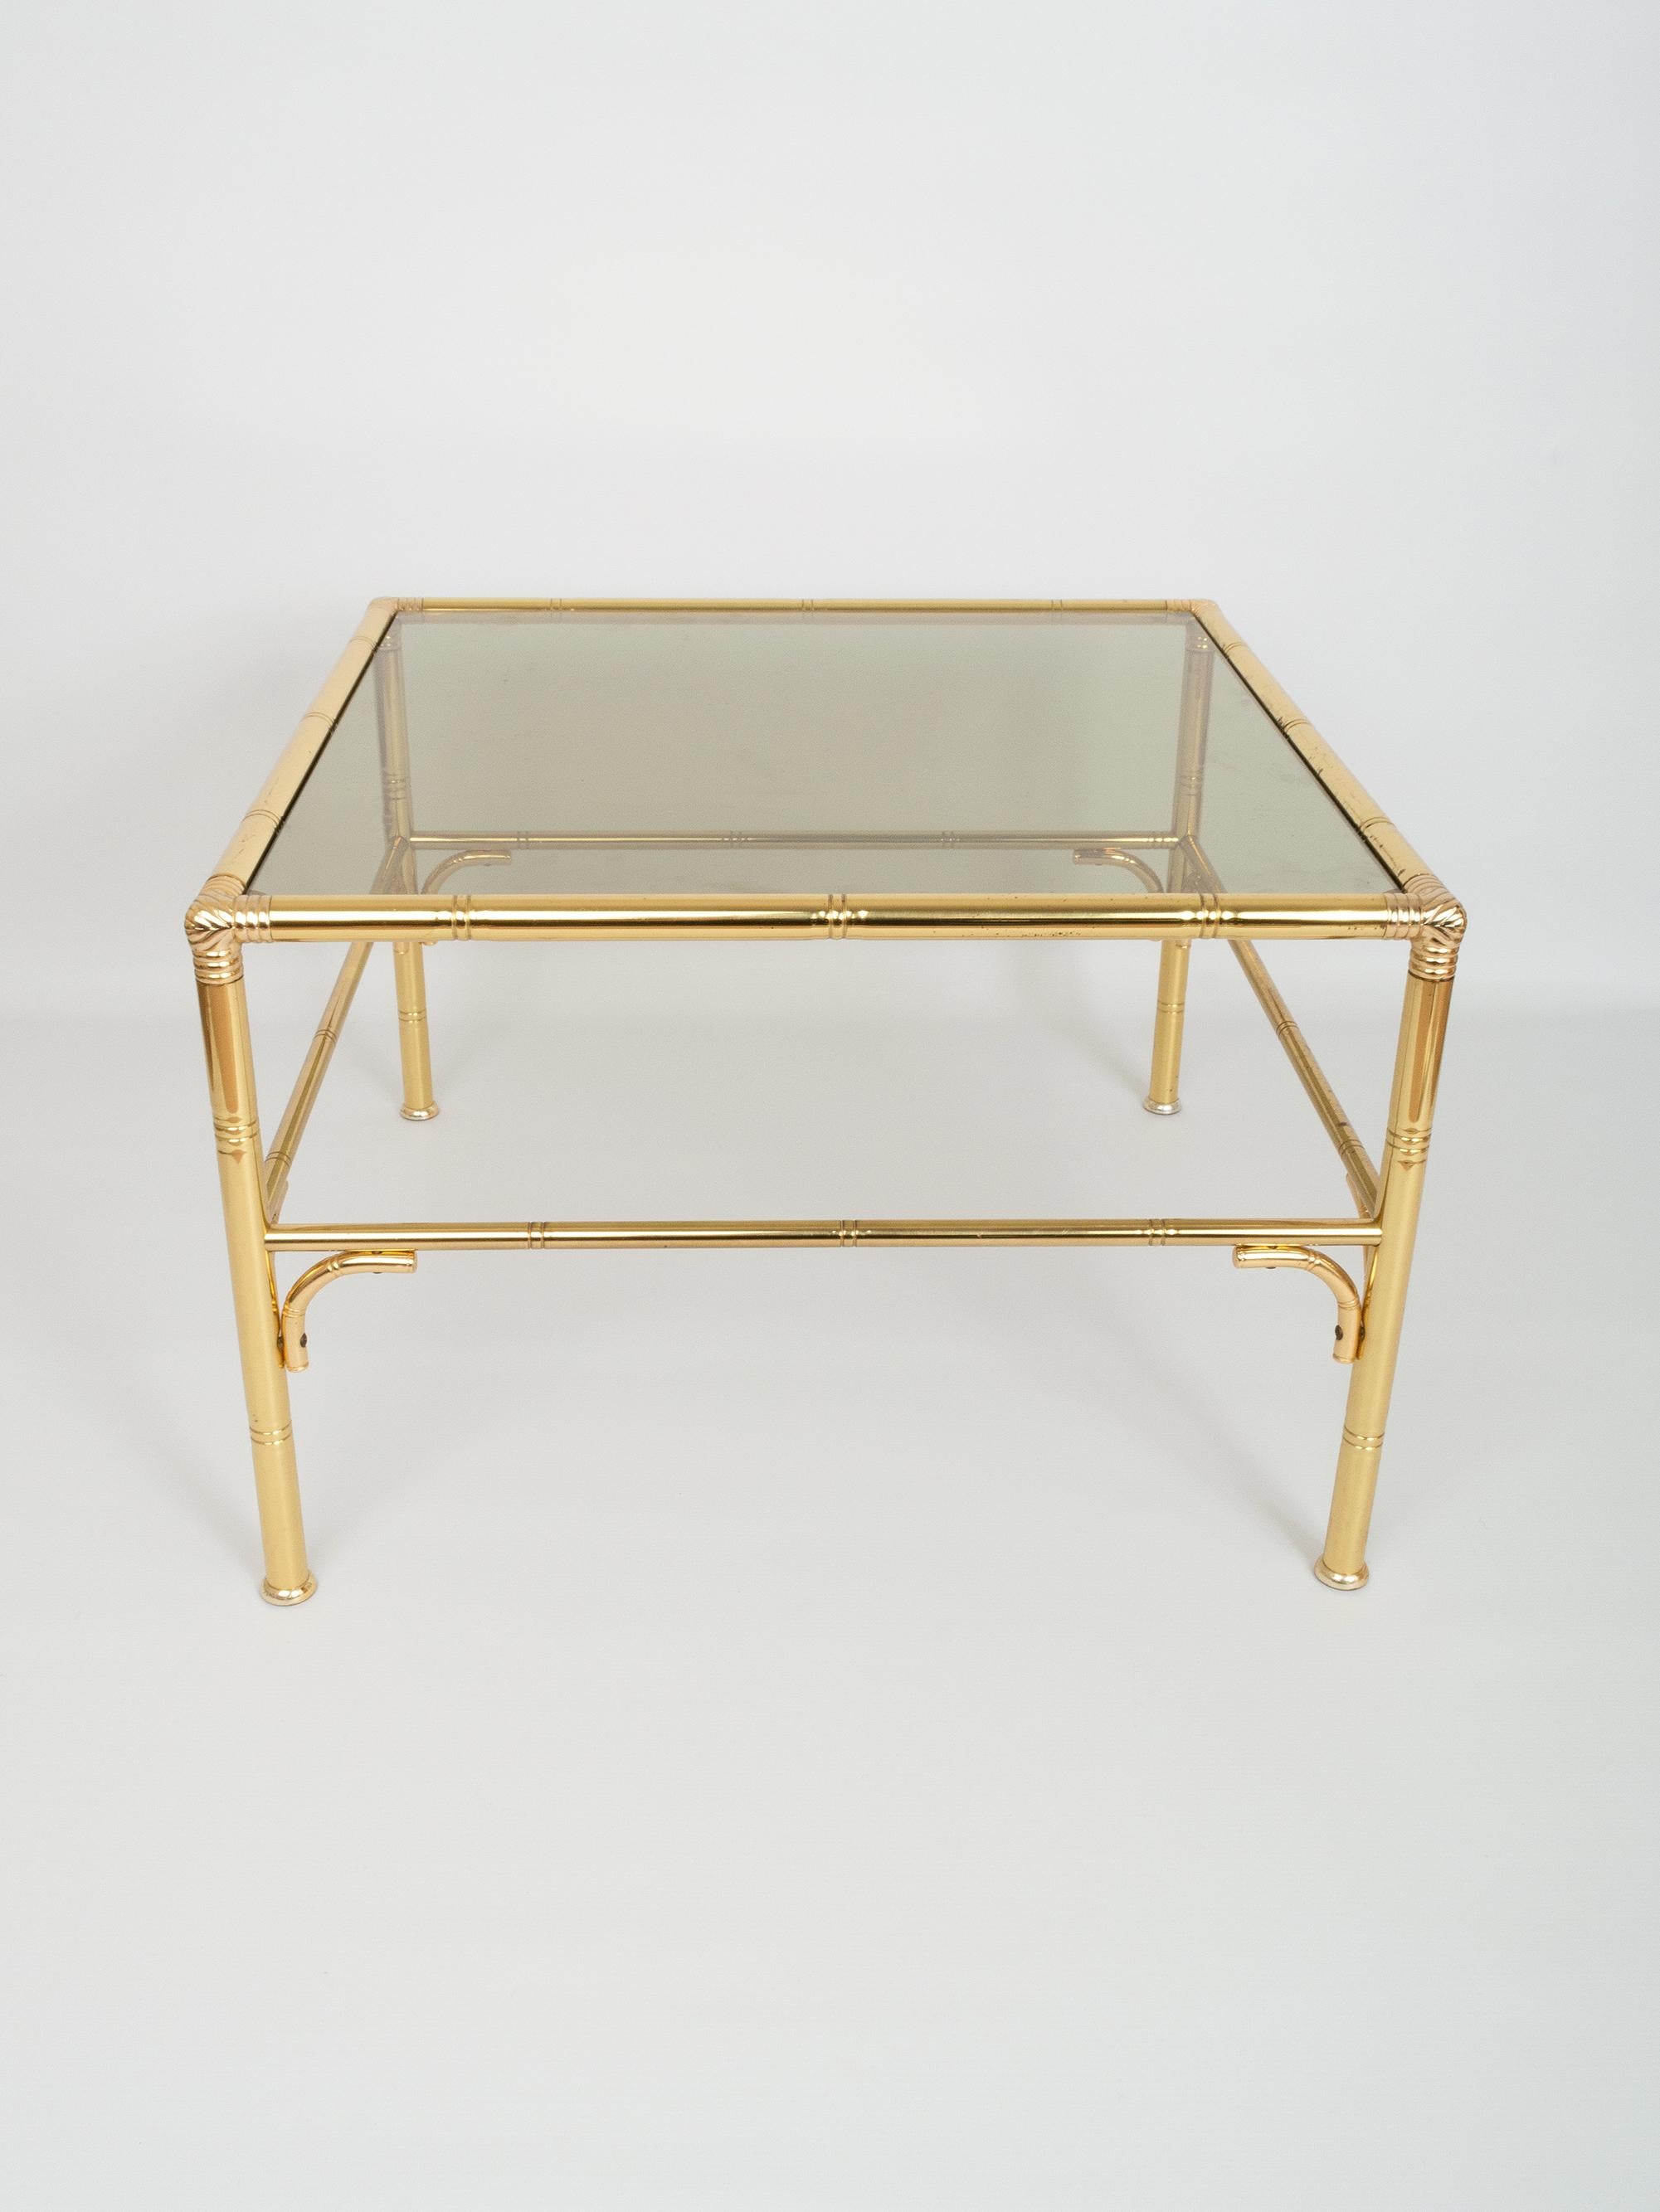 Midcentury faux bamboo gold brass and glass square coffee table, Italy, circa 1970.
Presented in very good vintage condition commensurate of age.